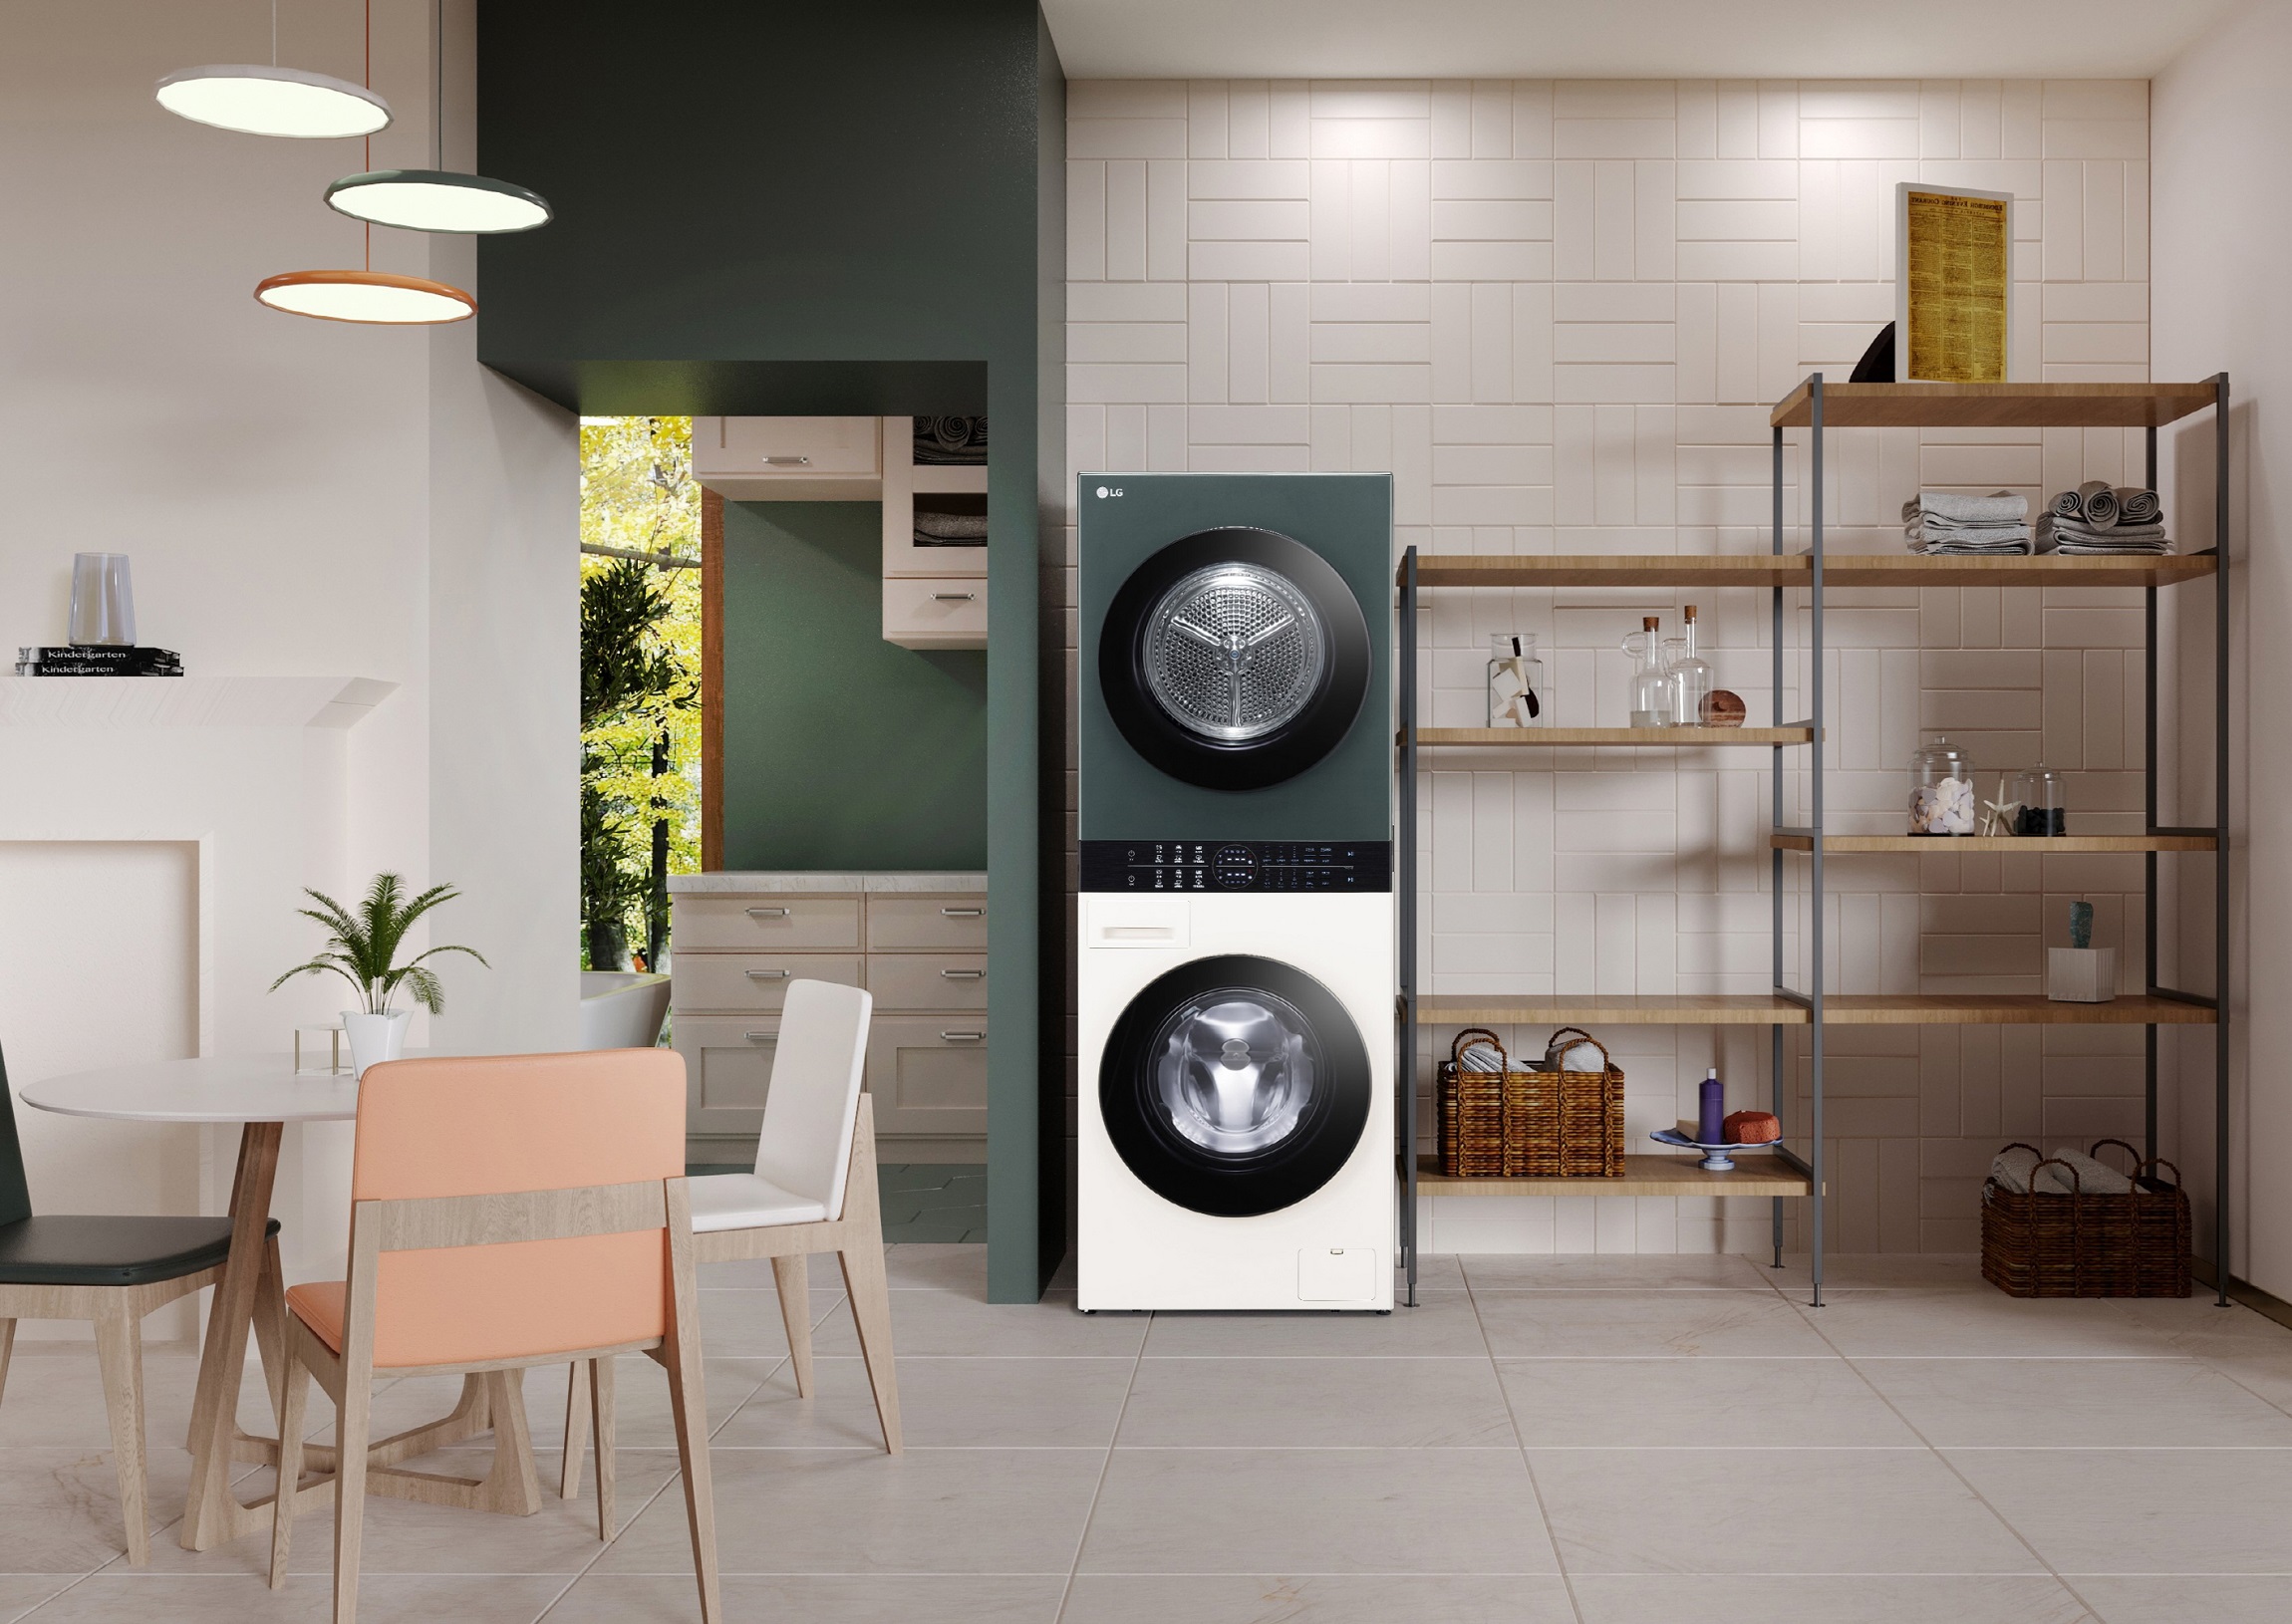 lg-s-space-saving-washtower-compact-showcases-all-in-one-laundry